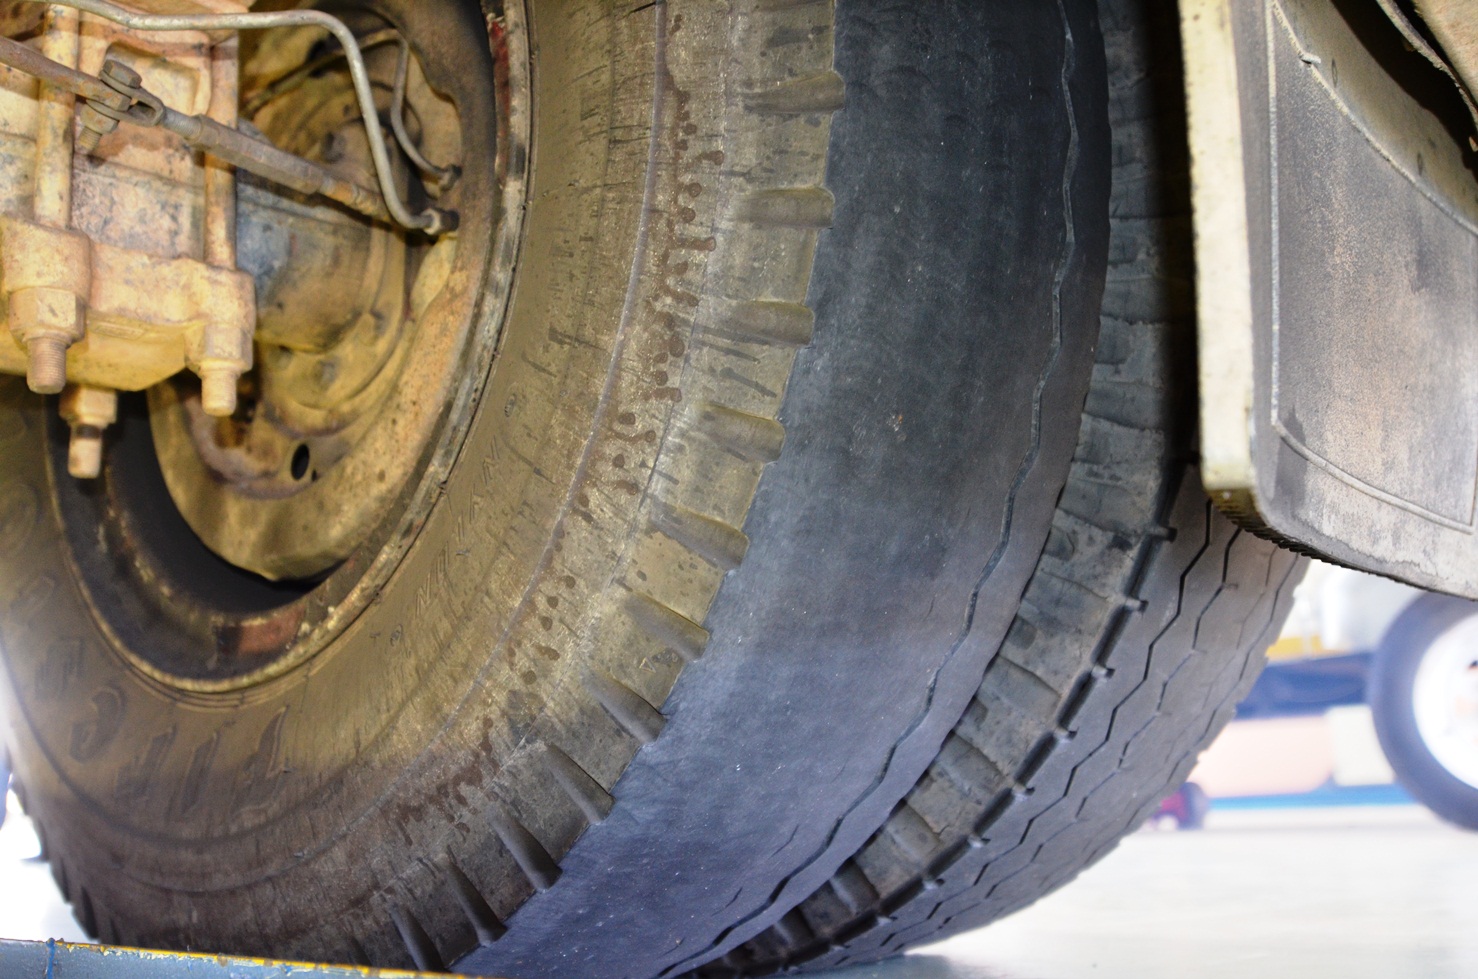 A worn-out tyre found during an inspection.